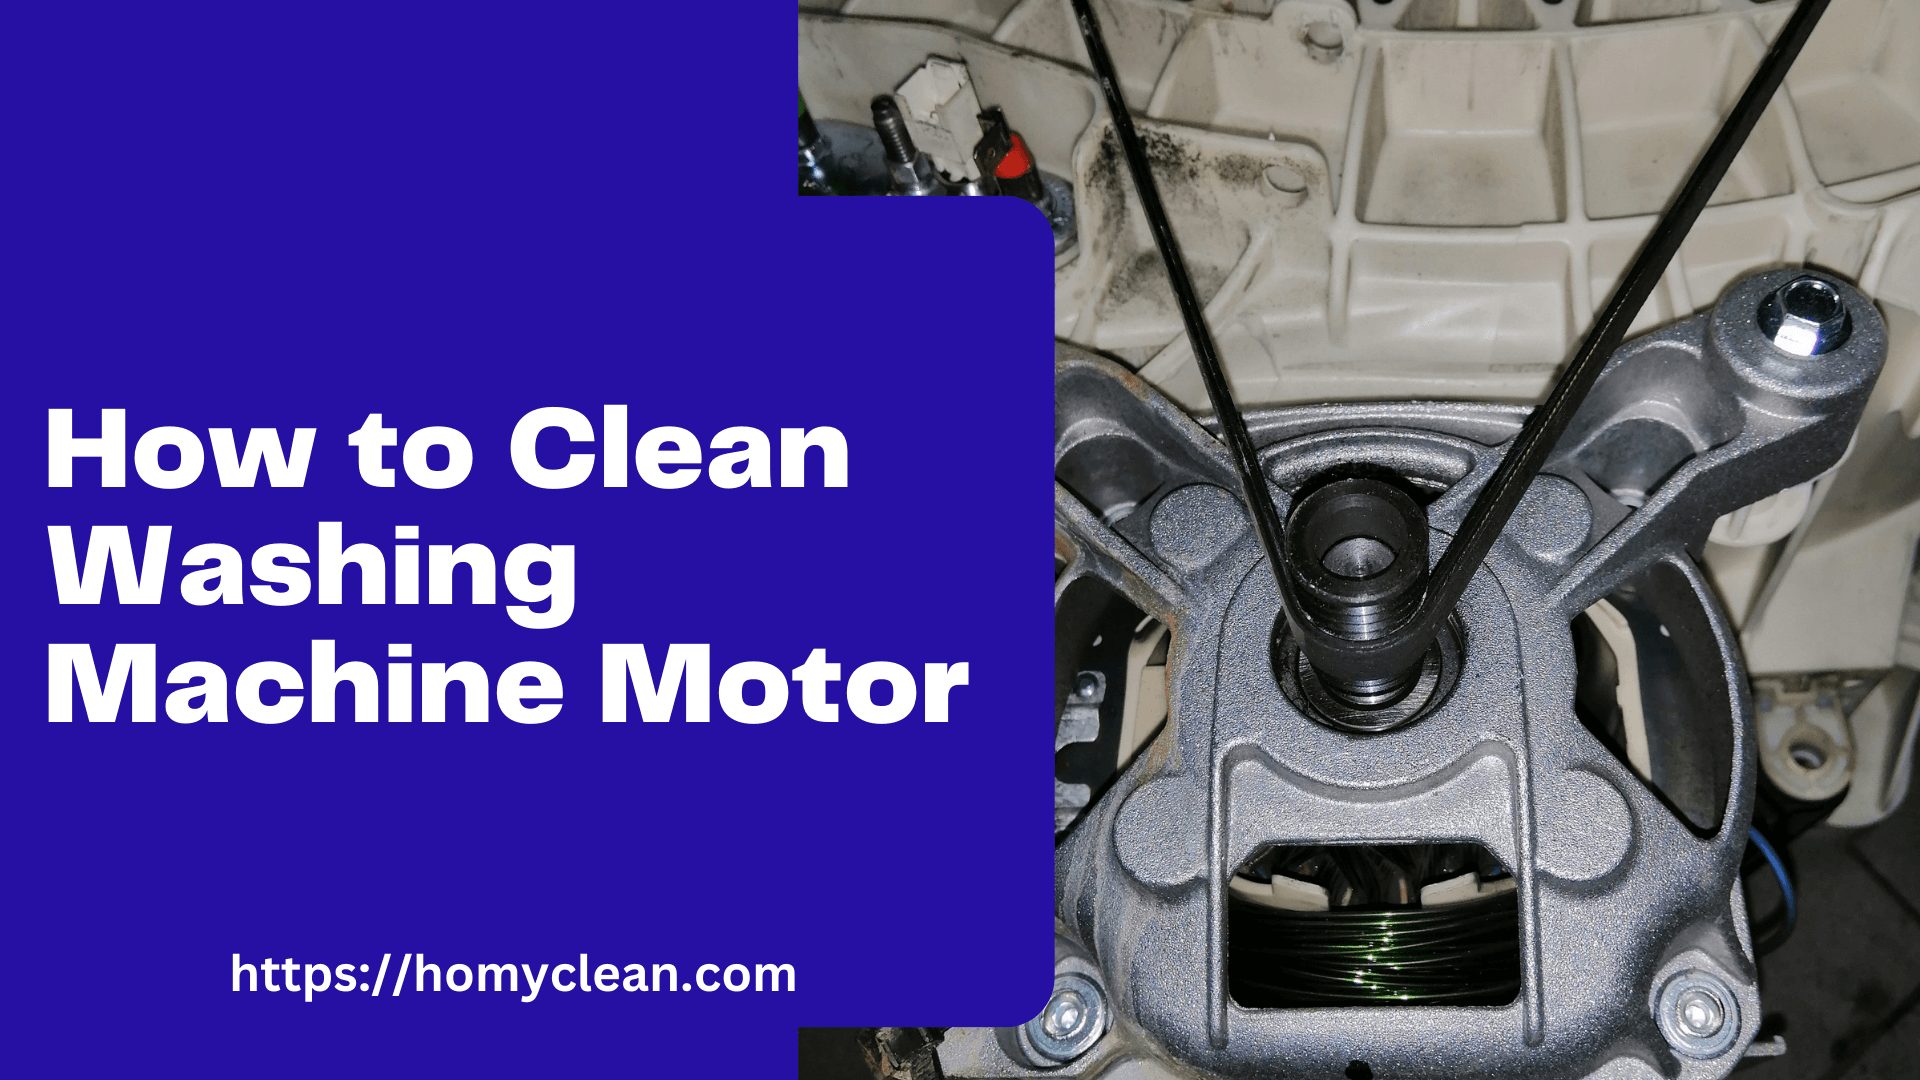 How to Clean Washing Machine Motor: A Comprehensive Guide